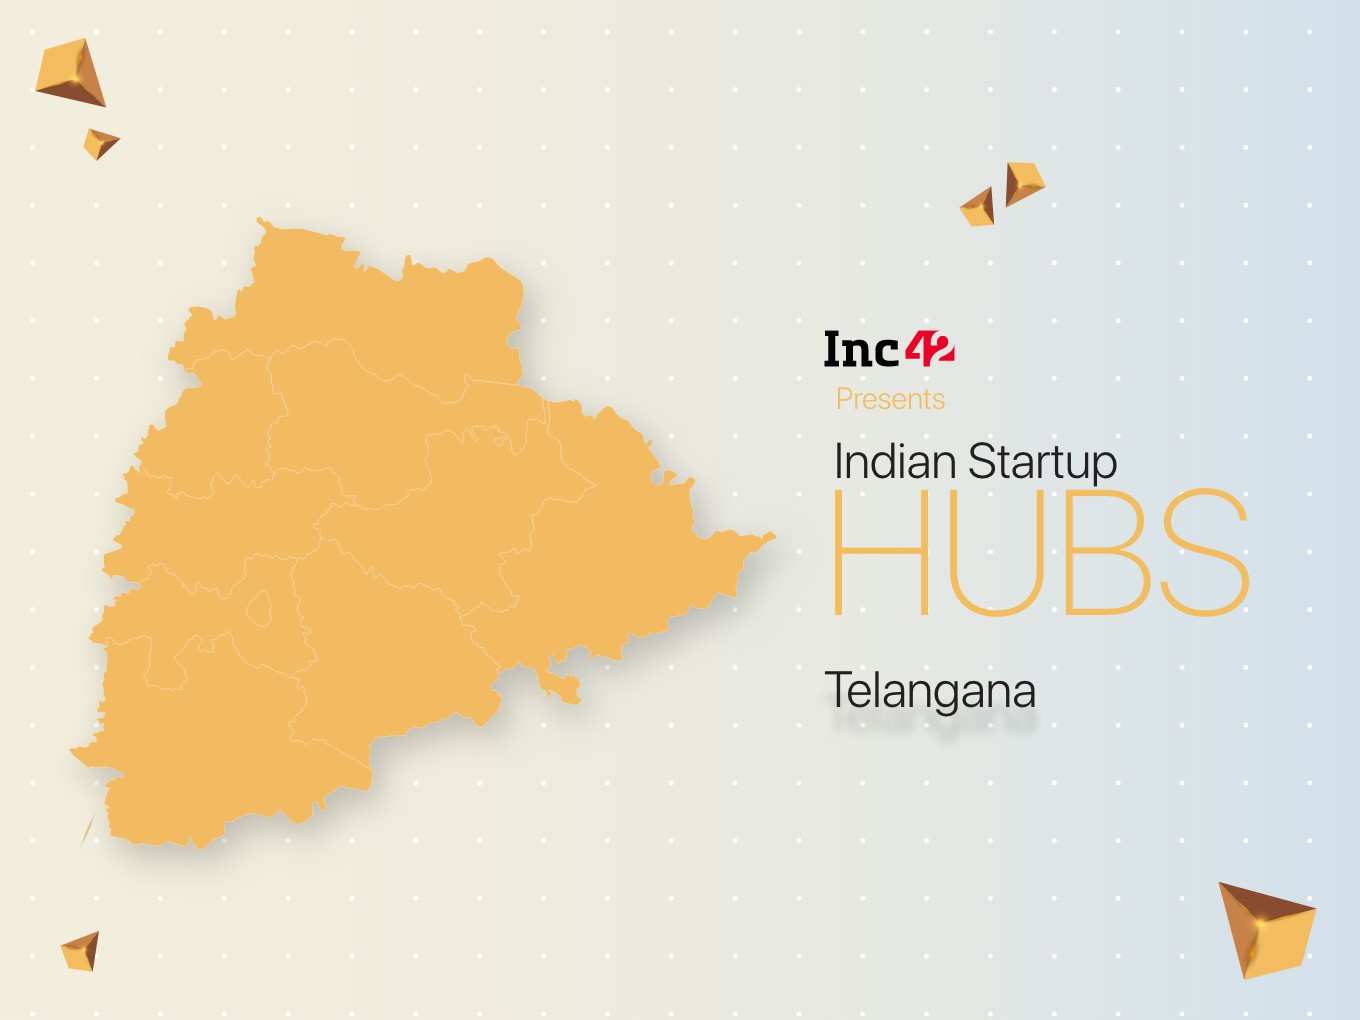 The Dawn Of Startups Has Arrived In The Model Startup State Telangana